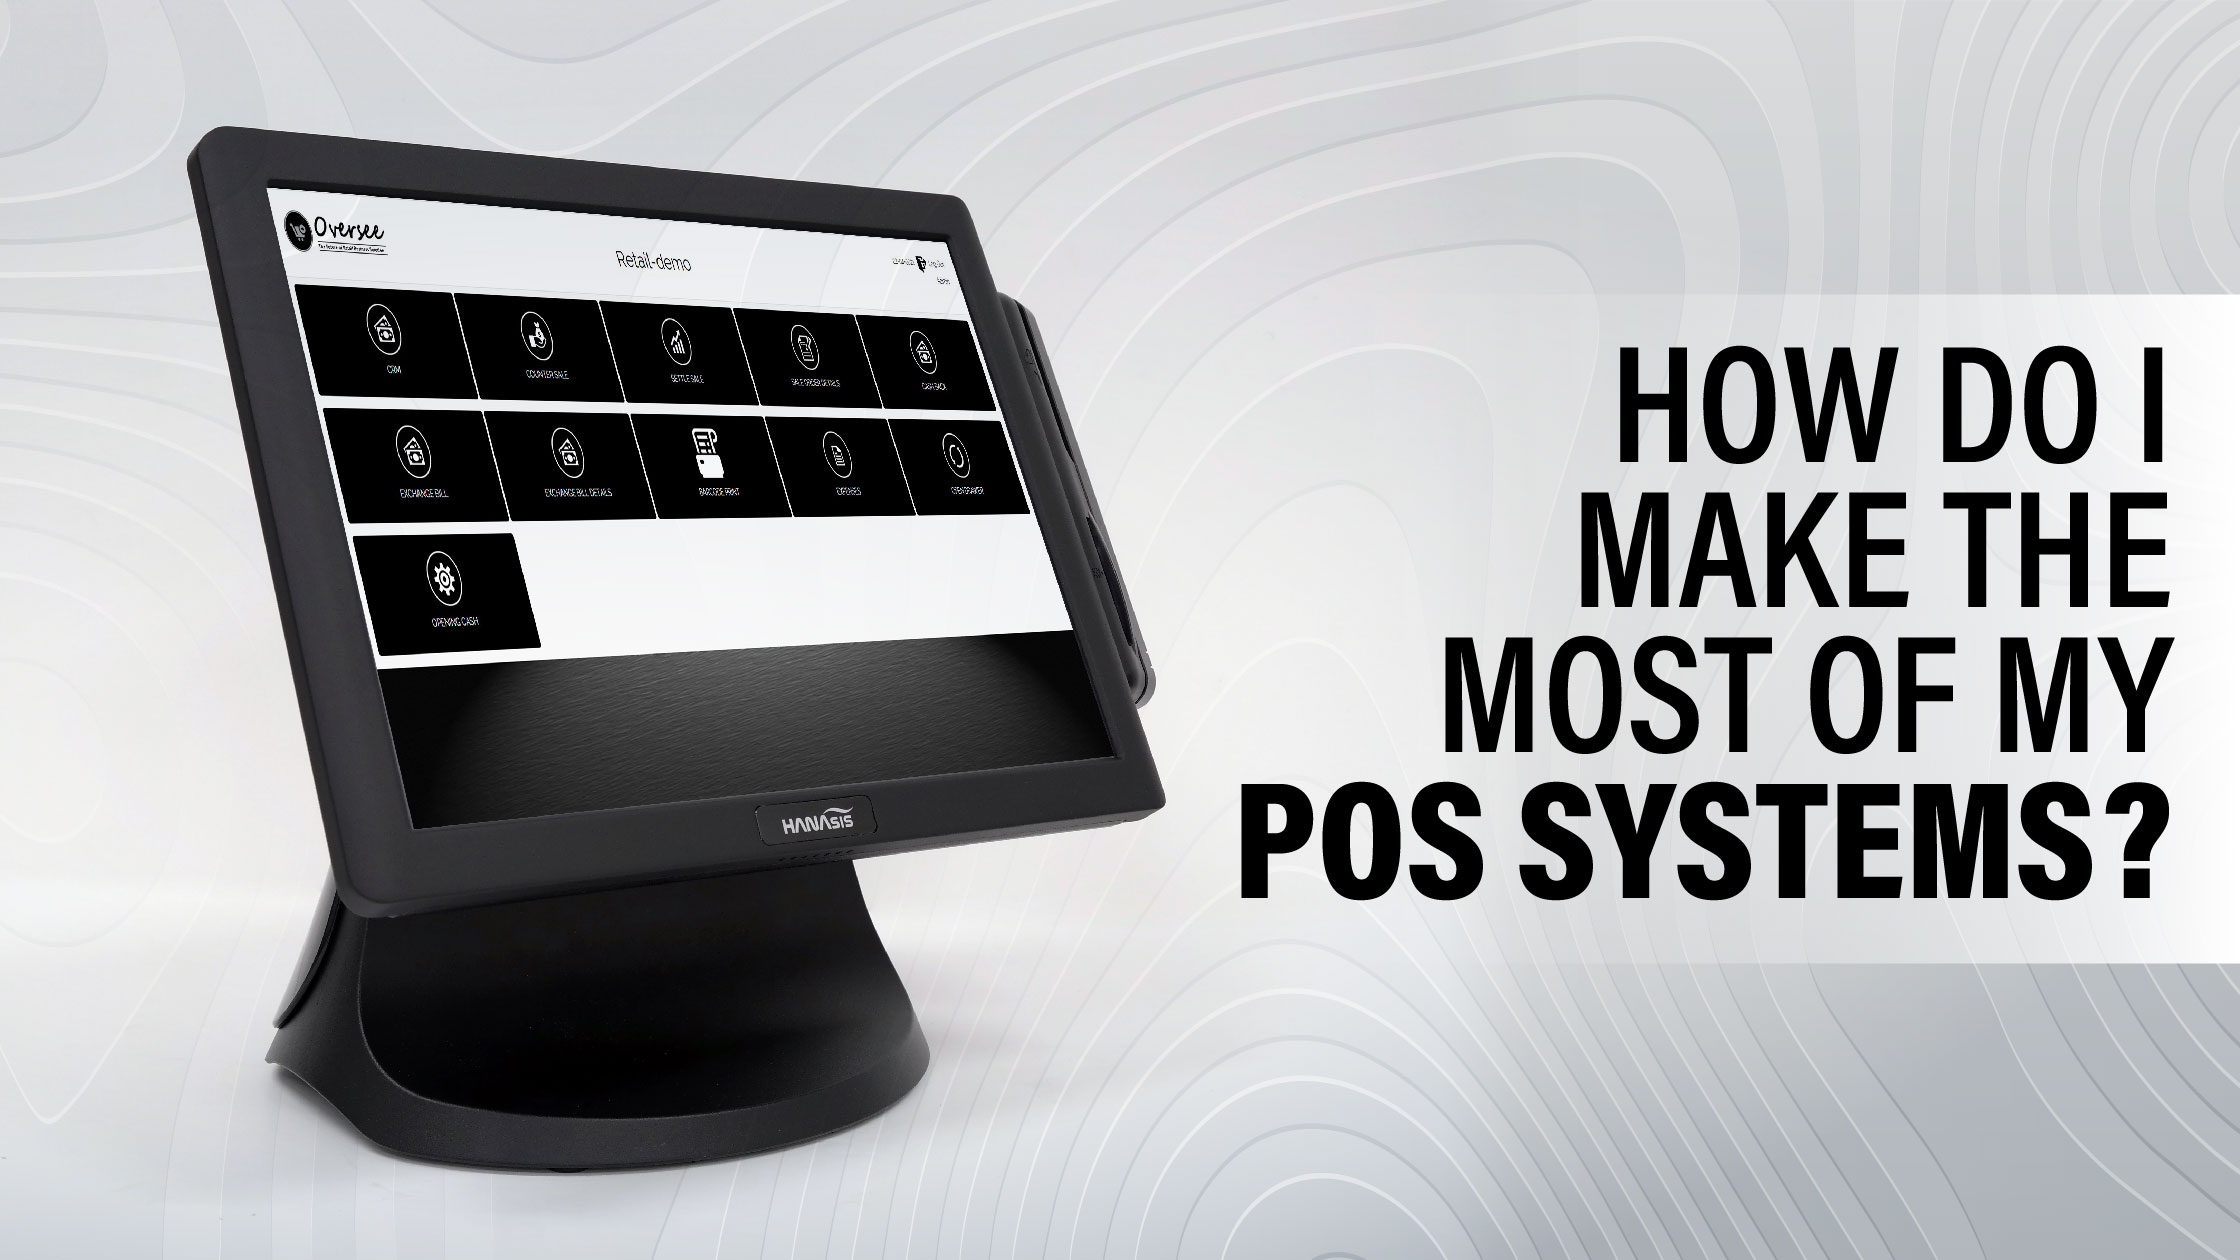 How Do I Make The Most Of My Pos Systems?